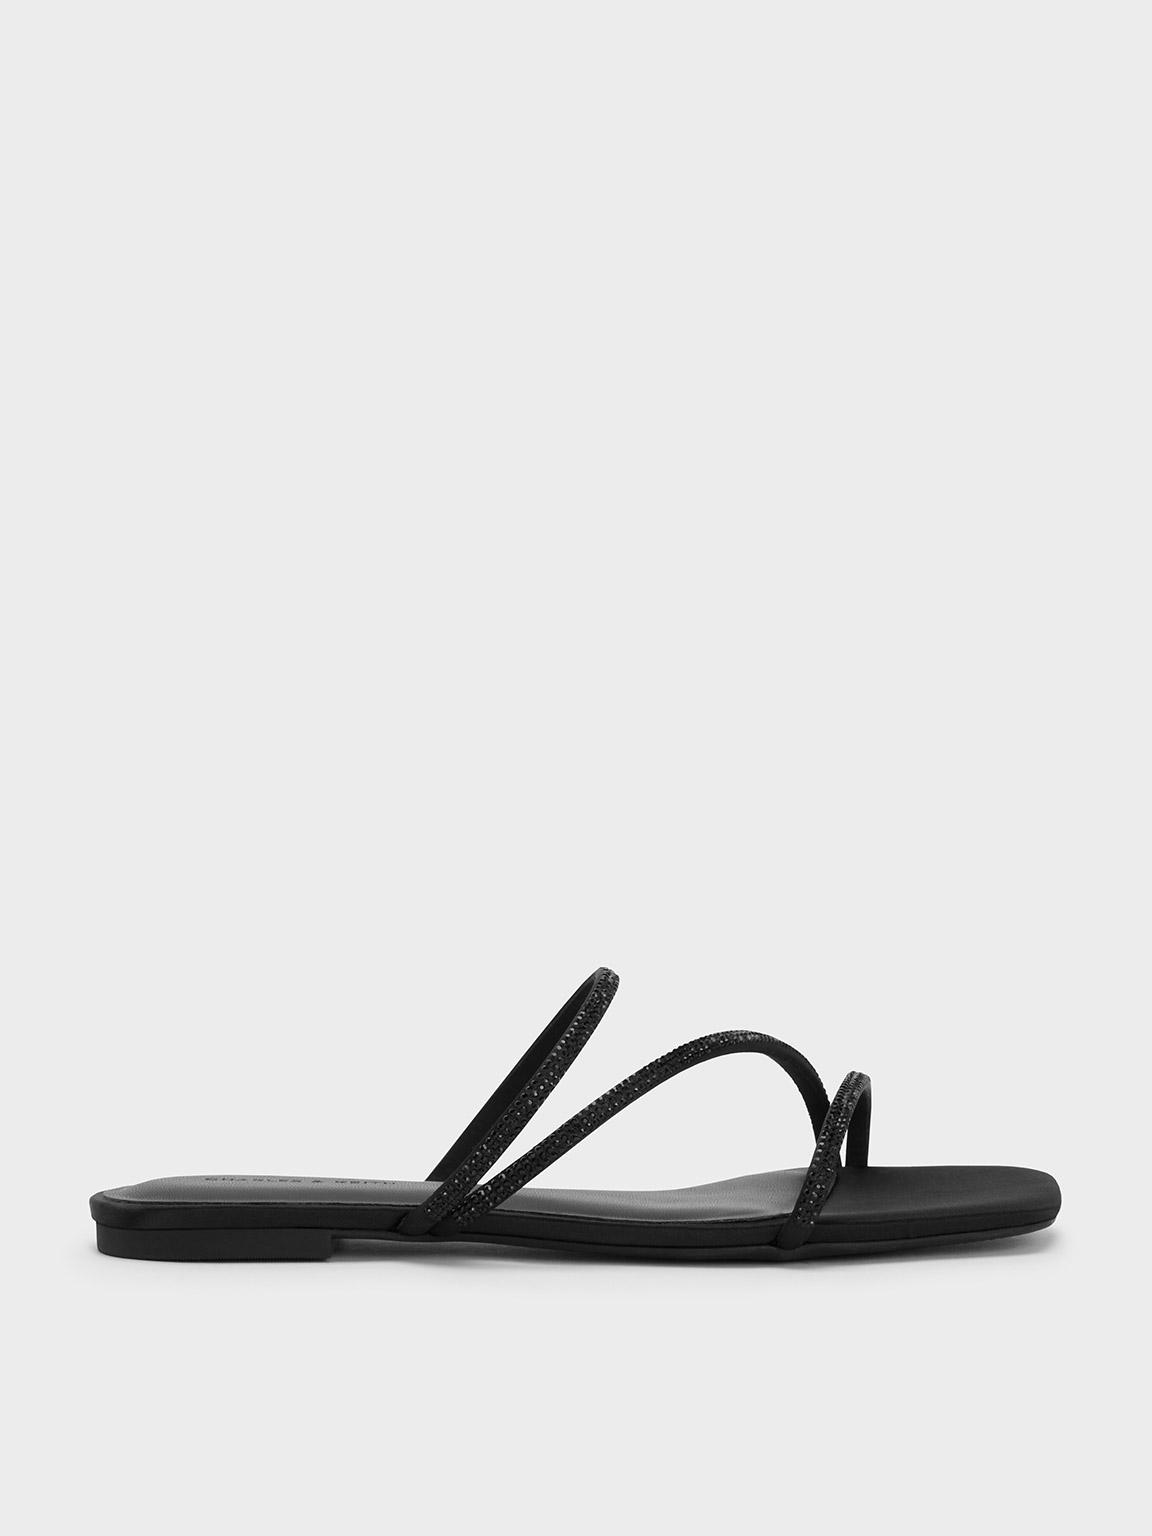 Strappy Sustainable Summer Sandal - The Evening Sandal - Black